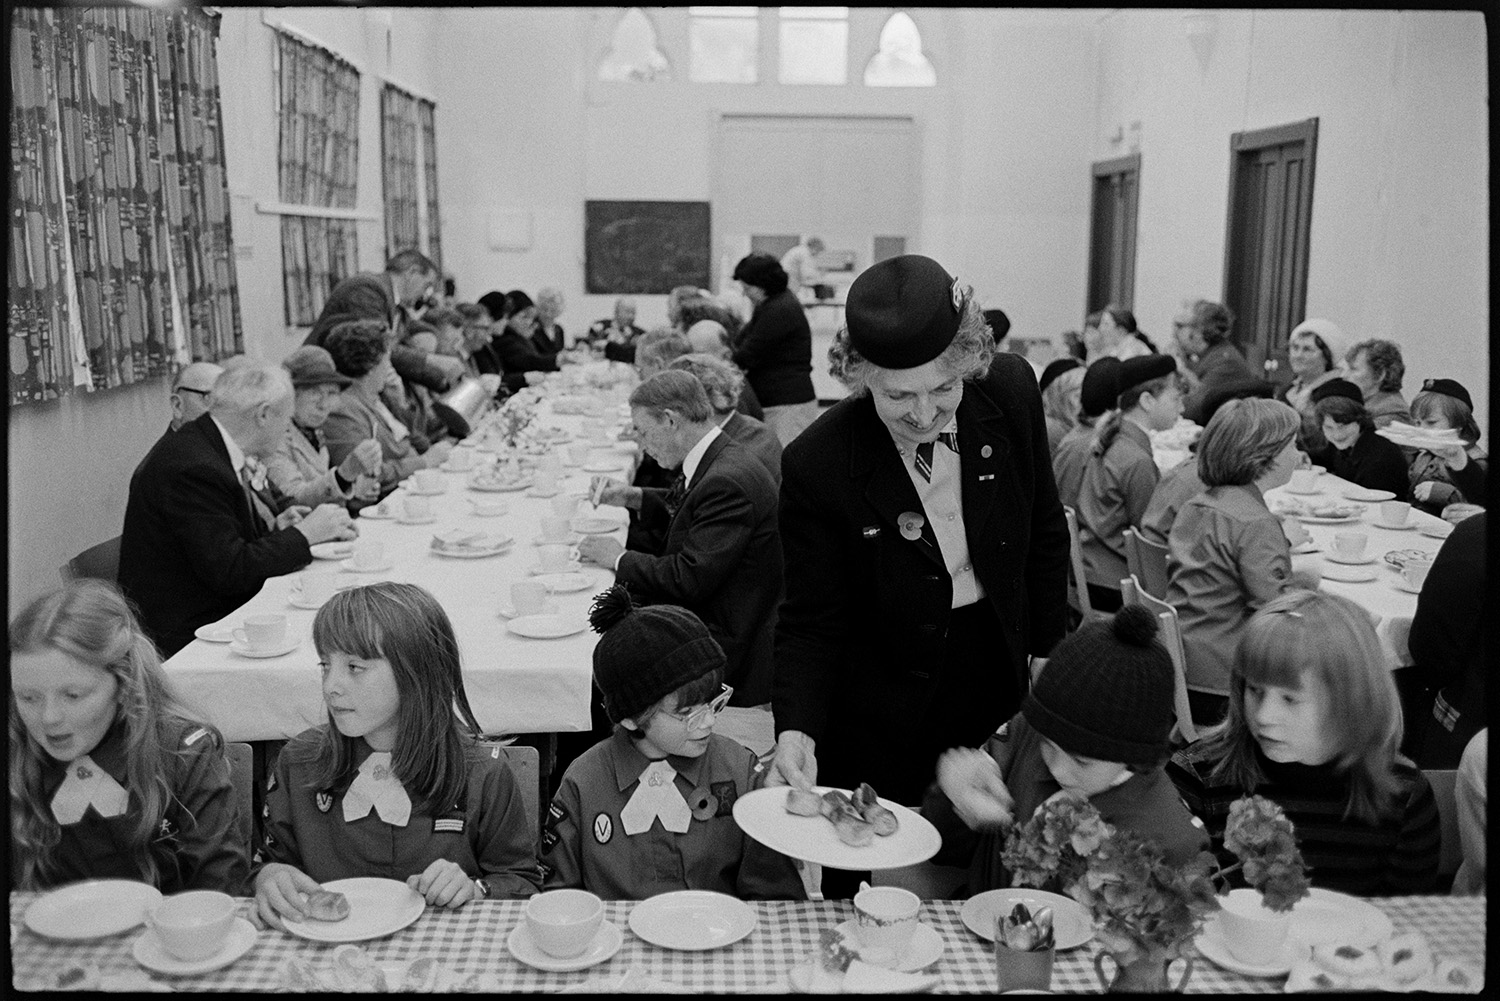 Tea in village hall after Armistice Day parade. 
[Men, women and children having tea in Winkleigh Village Hall after a parade for Remembrance Day. A woman is serving sausage rolls to girls sat at a table in the foreground. The girls are wearing Brownie uniforms.]